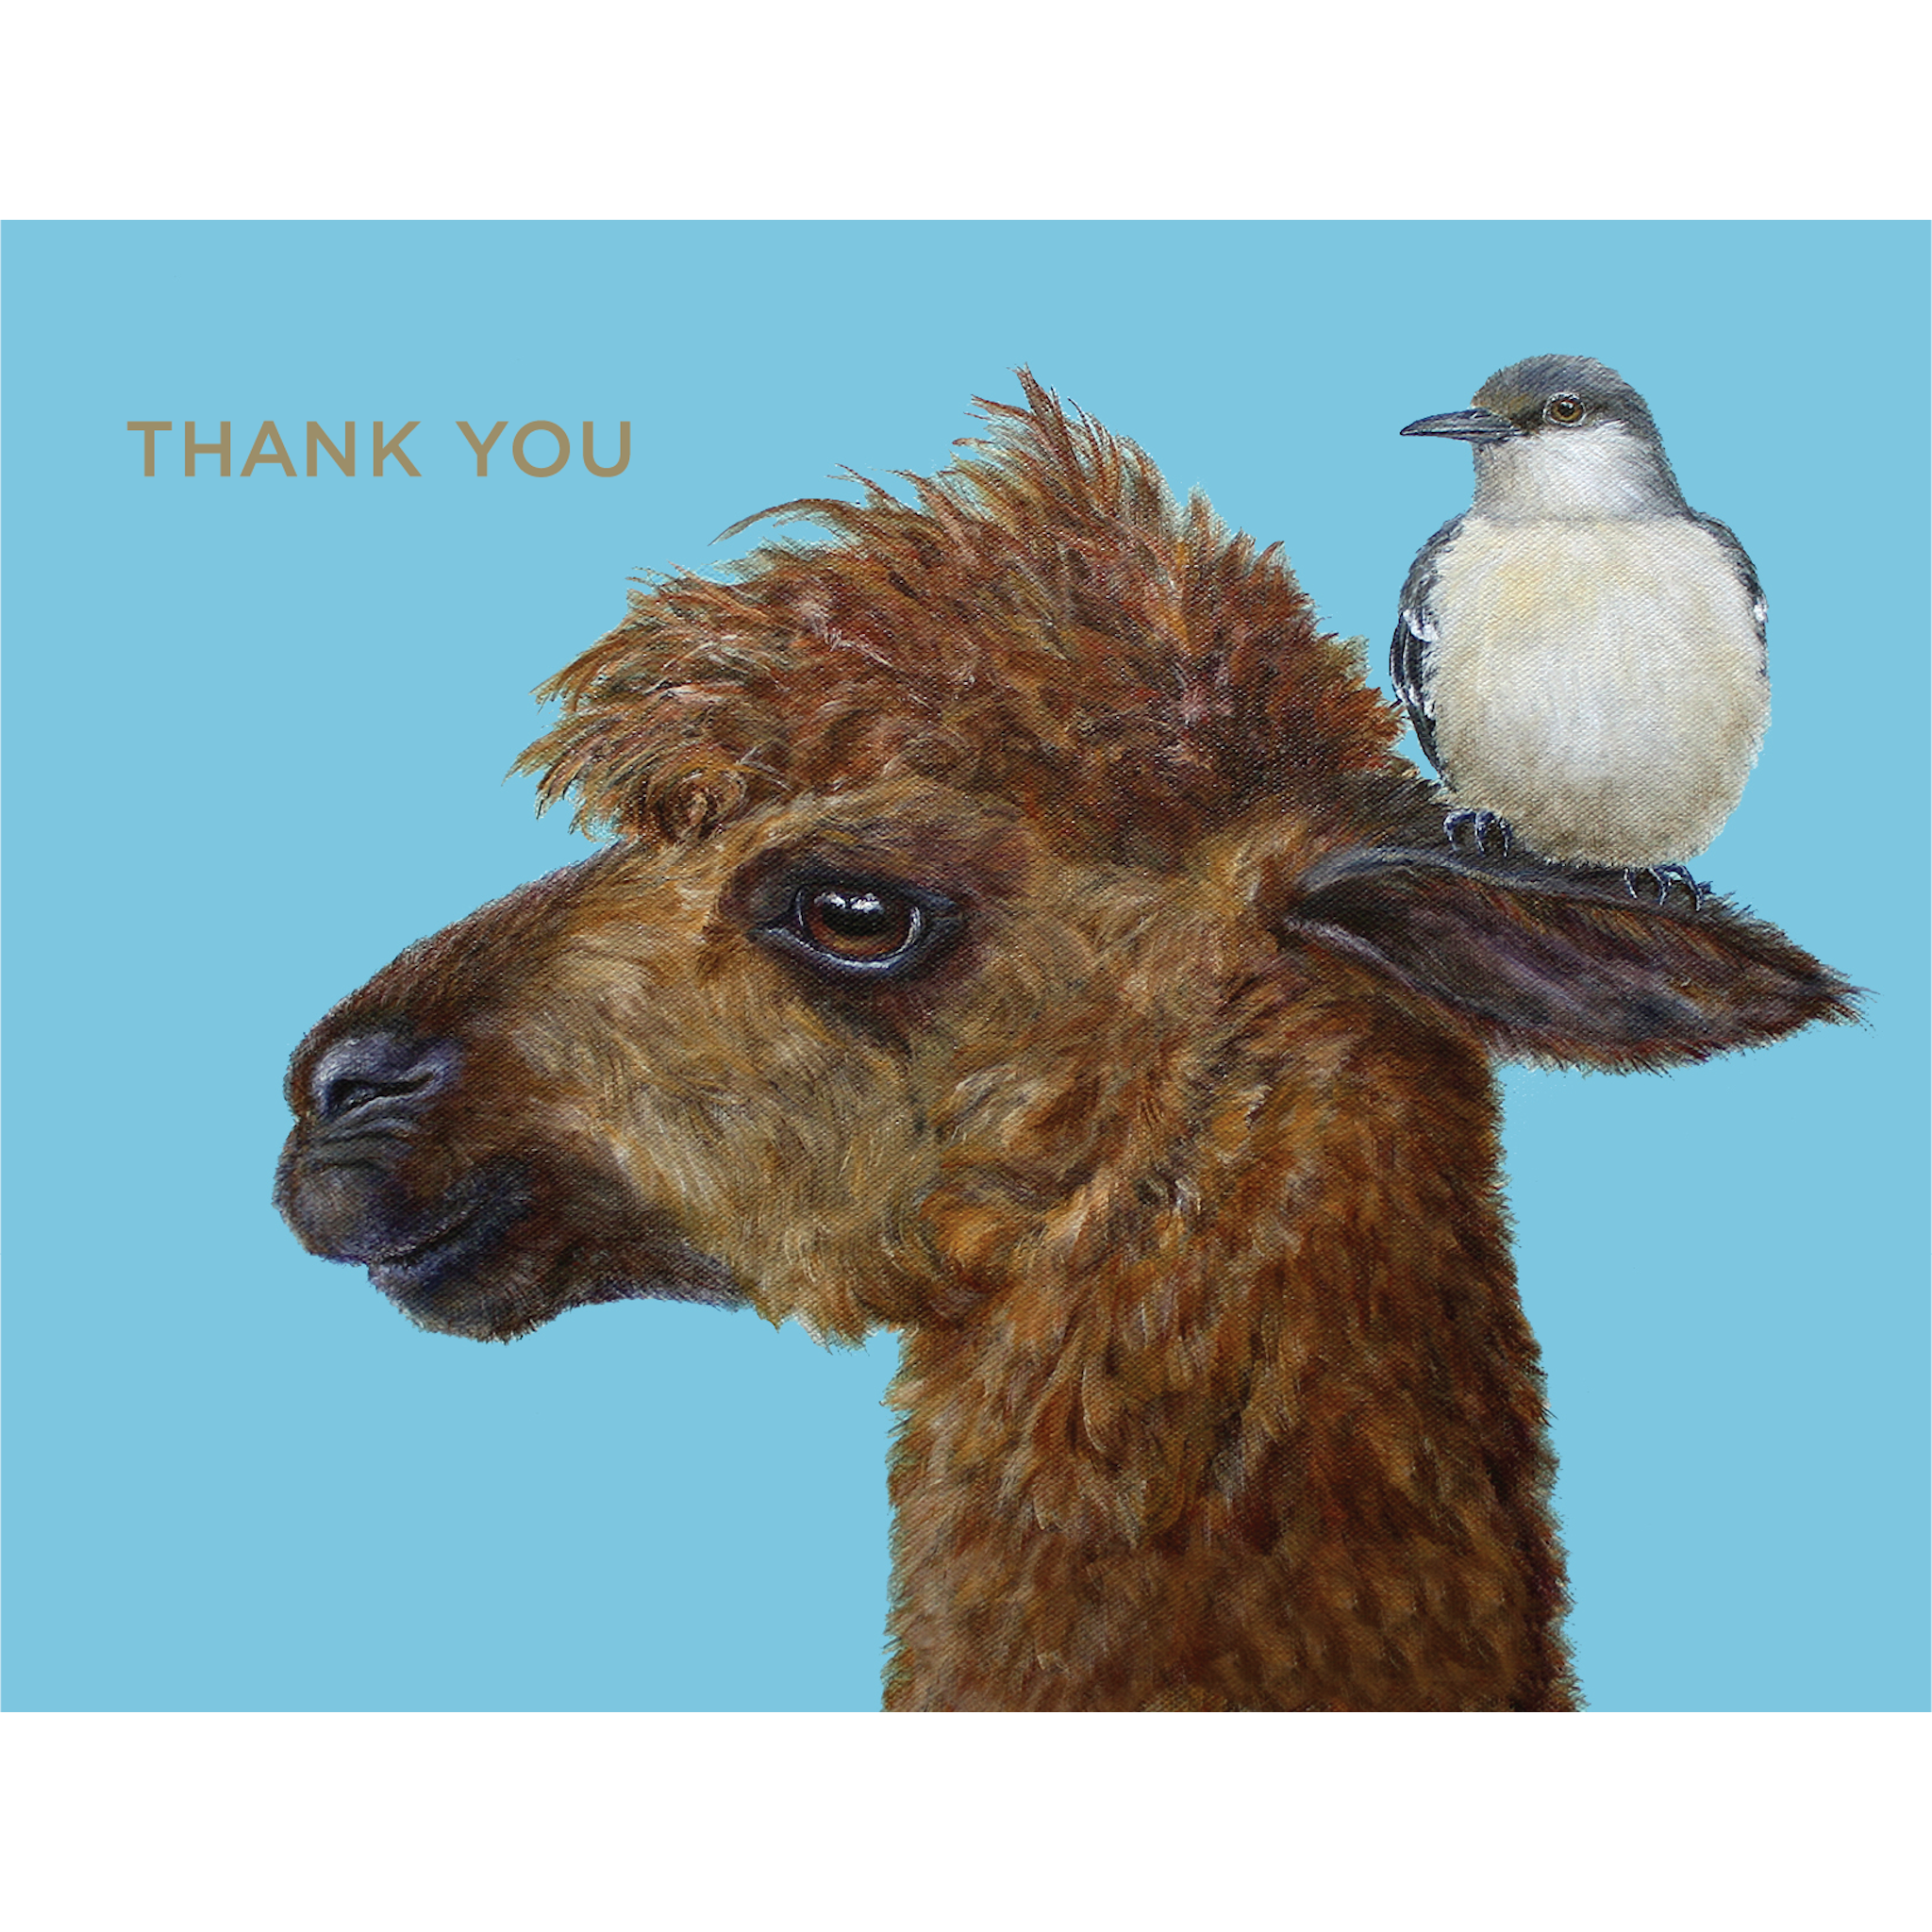 A grateful Hester &amp; Cook alpaca wearing a Thank You Alpaca Card on its head stands against a serene blue background.